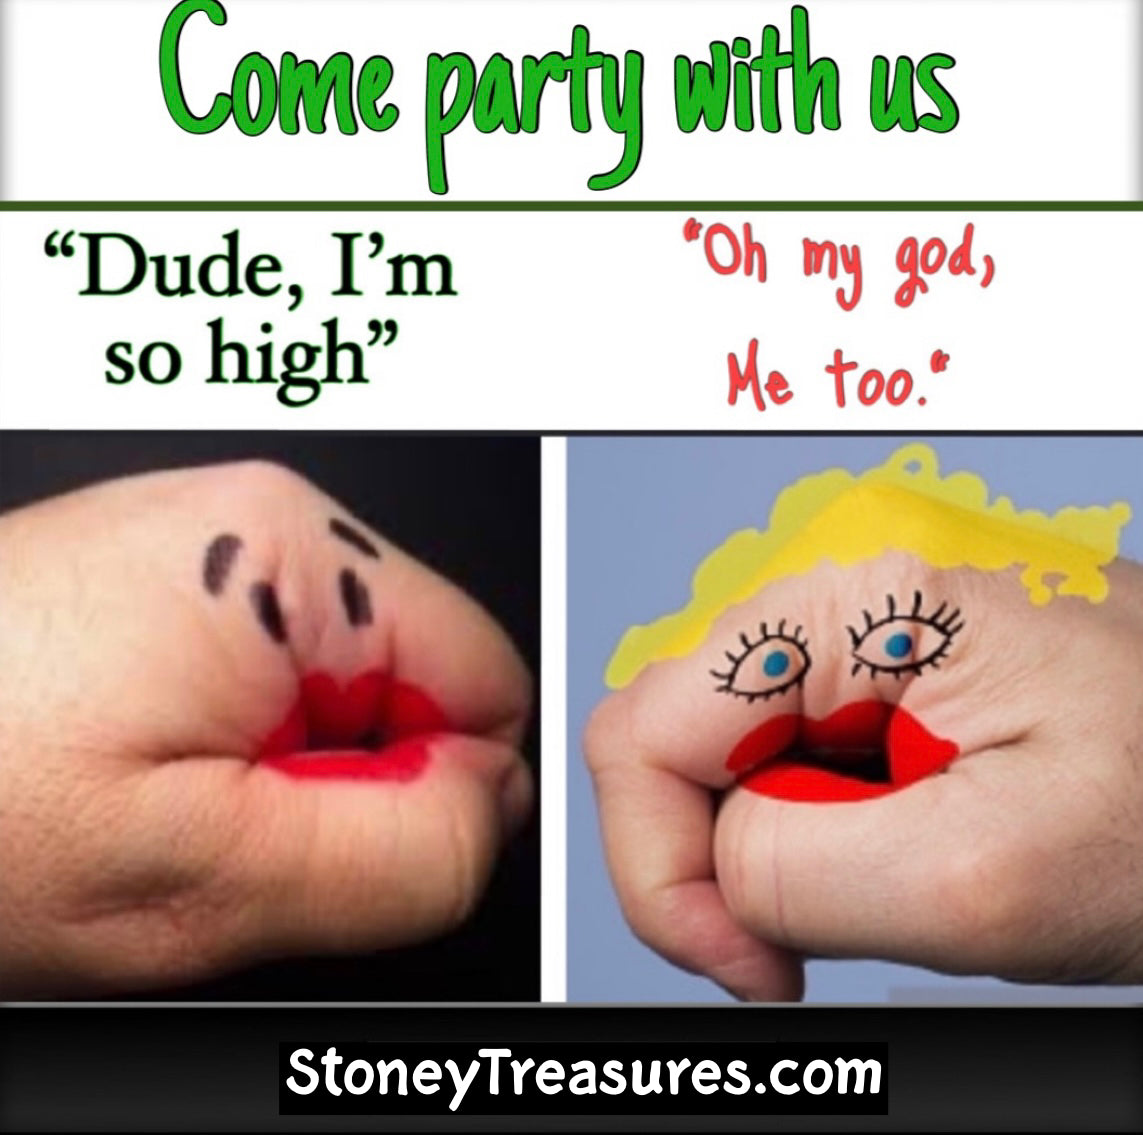 Come Party With Us @ Stoney Treasures